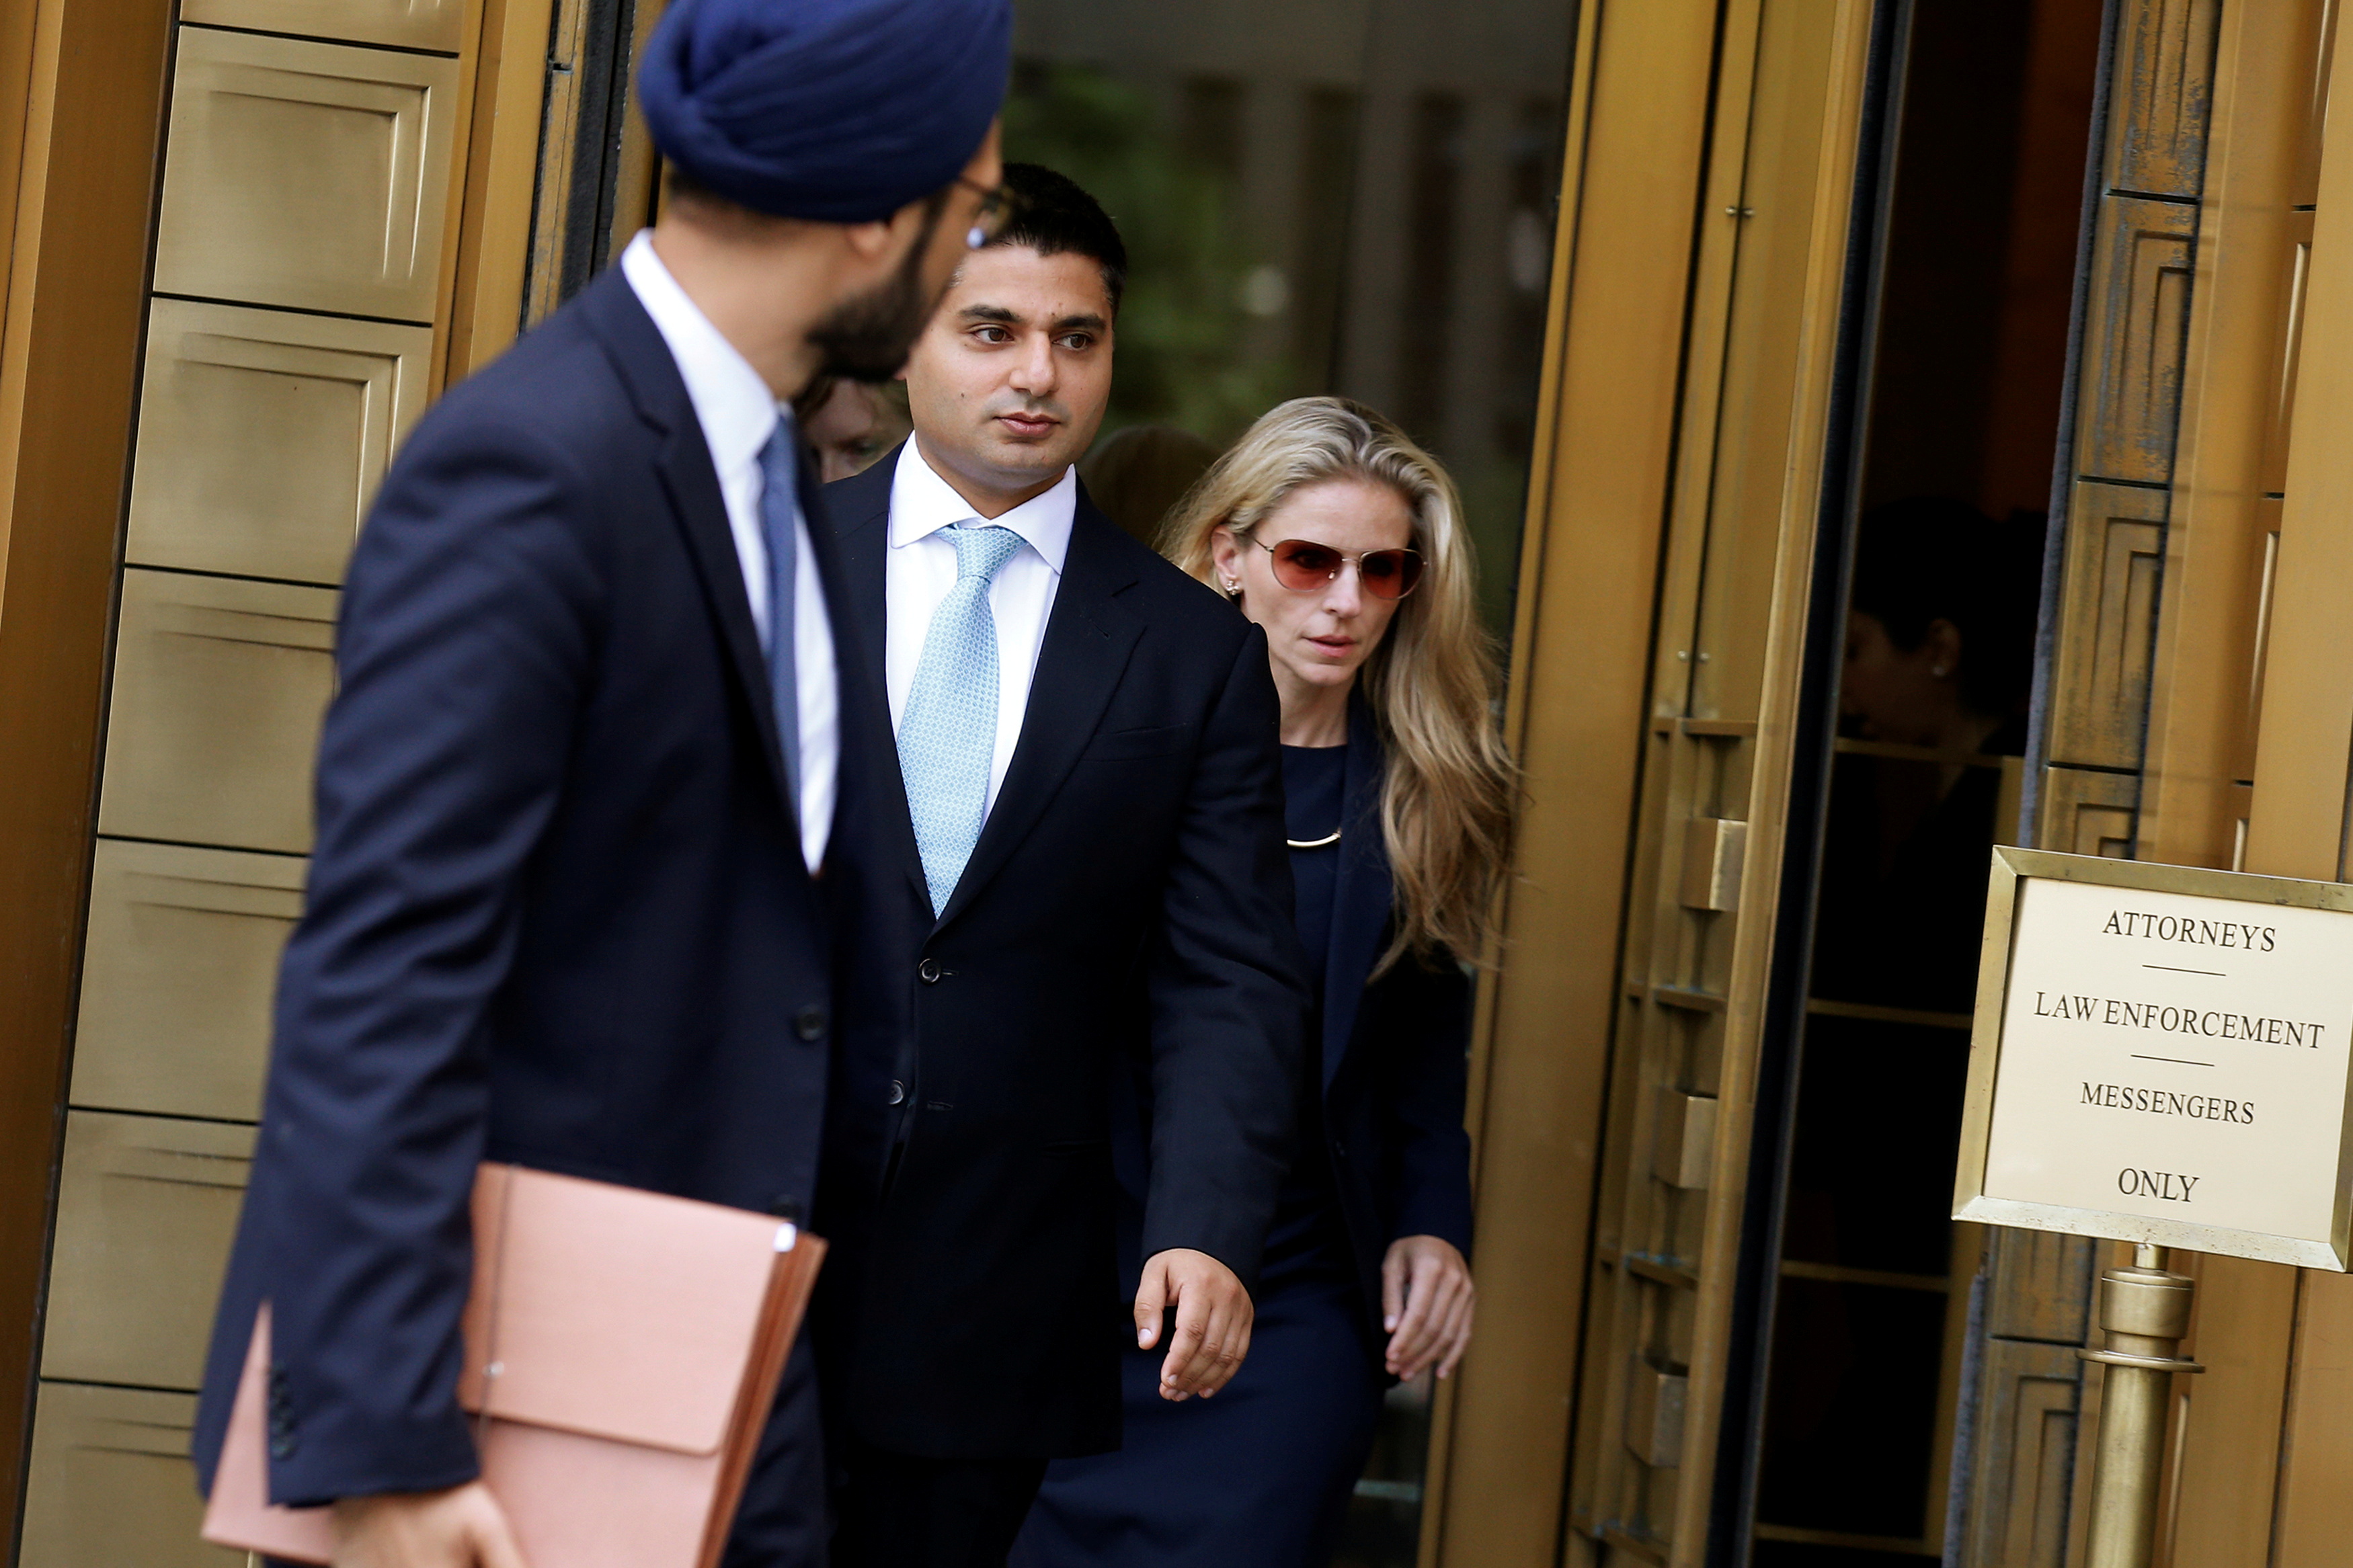 Rohan Ramchandani (center), former London-based trader for Citigroup Inc, exits the U.S. Federal Court in Manhattan following a hearing for conspiring to rig prices in the foreign exchange market in New York City, U.S., July 17, 2017. REUTERS/Brendan McDermid/File Photo